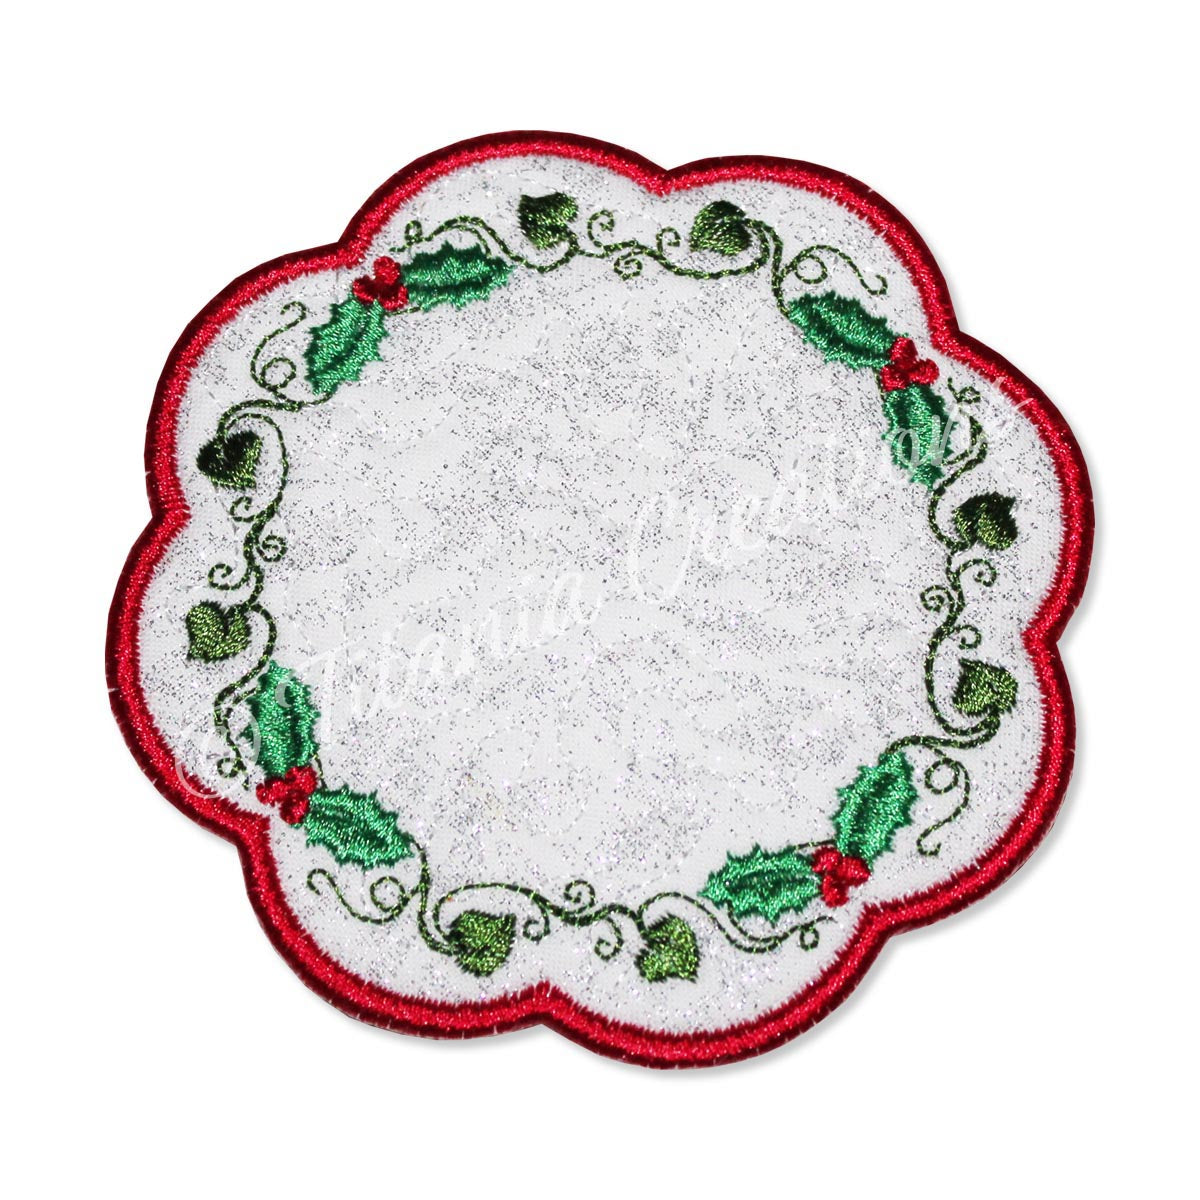 ITH Holly & Ivy Candle Mat 4x4